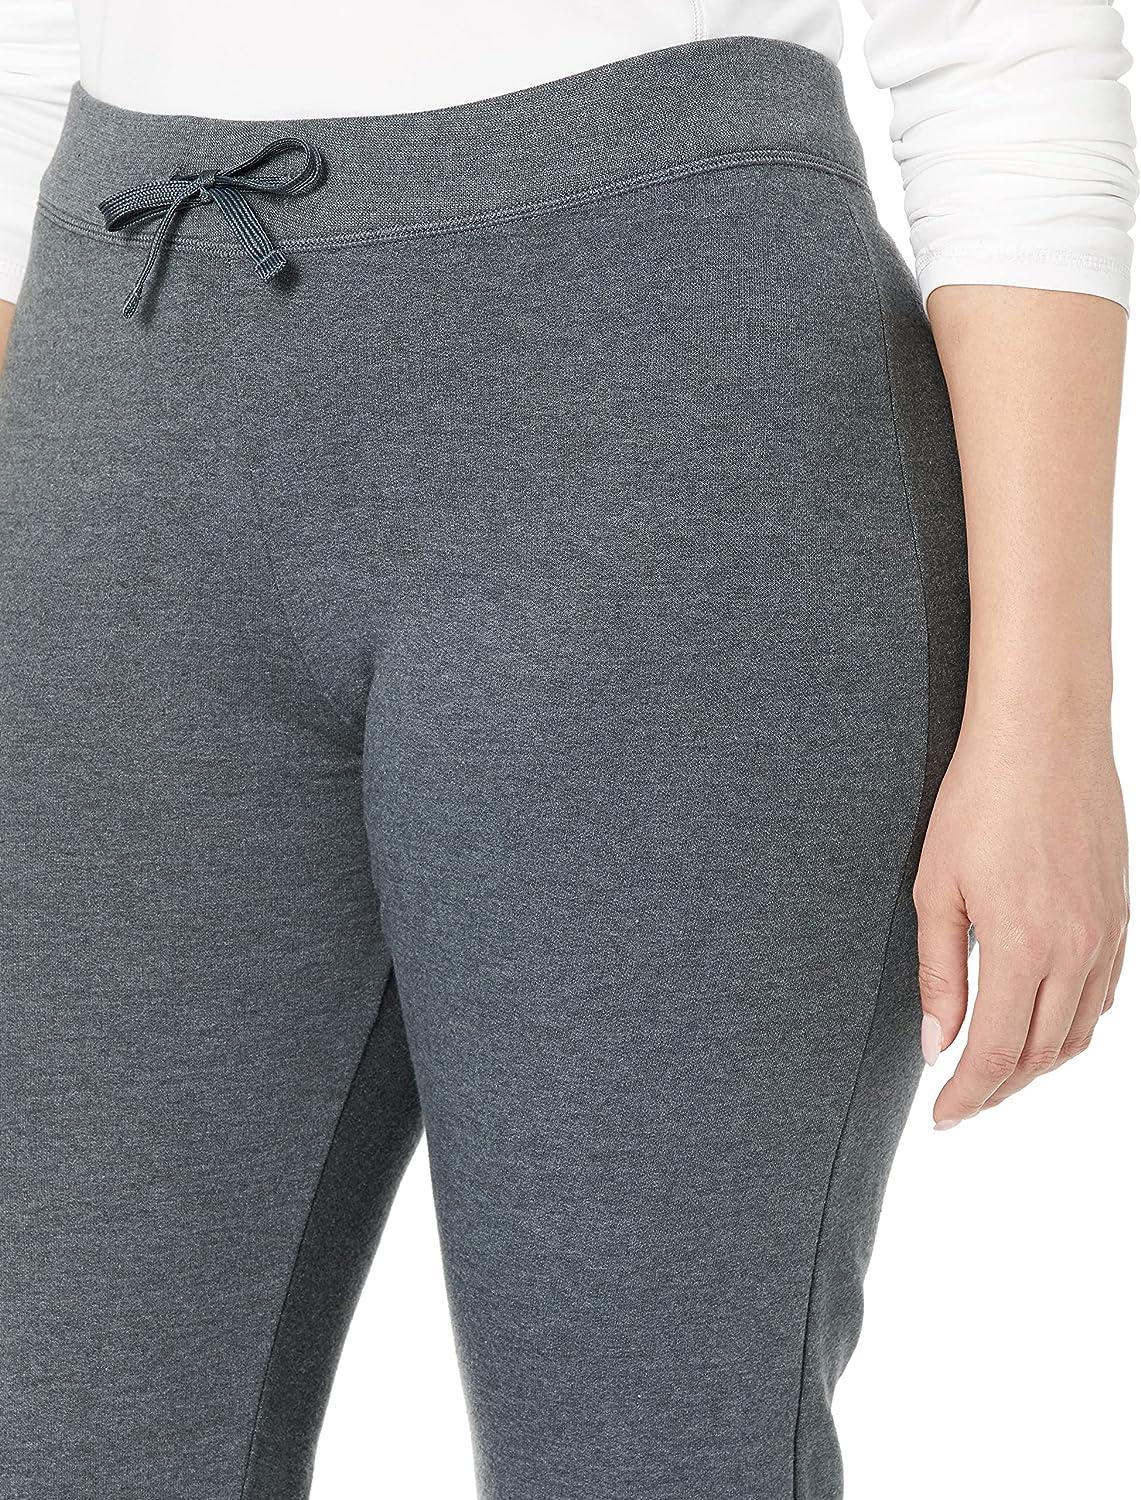 Fruit of the Loom Women's Crafted Comfort Crafted Comfort Joggers & Open  Bottom Pants Joggers Medium French Terry Black Heather